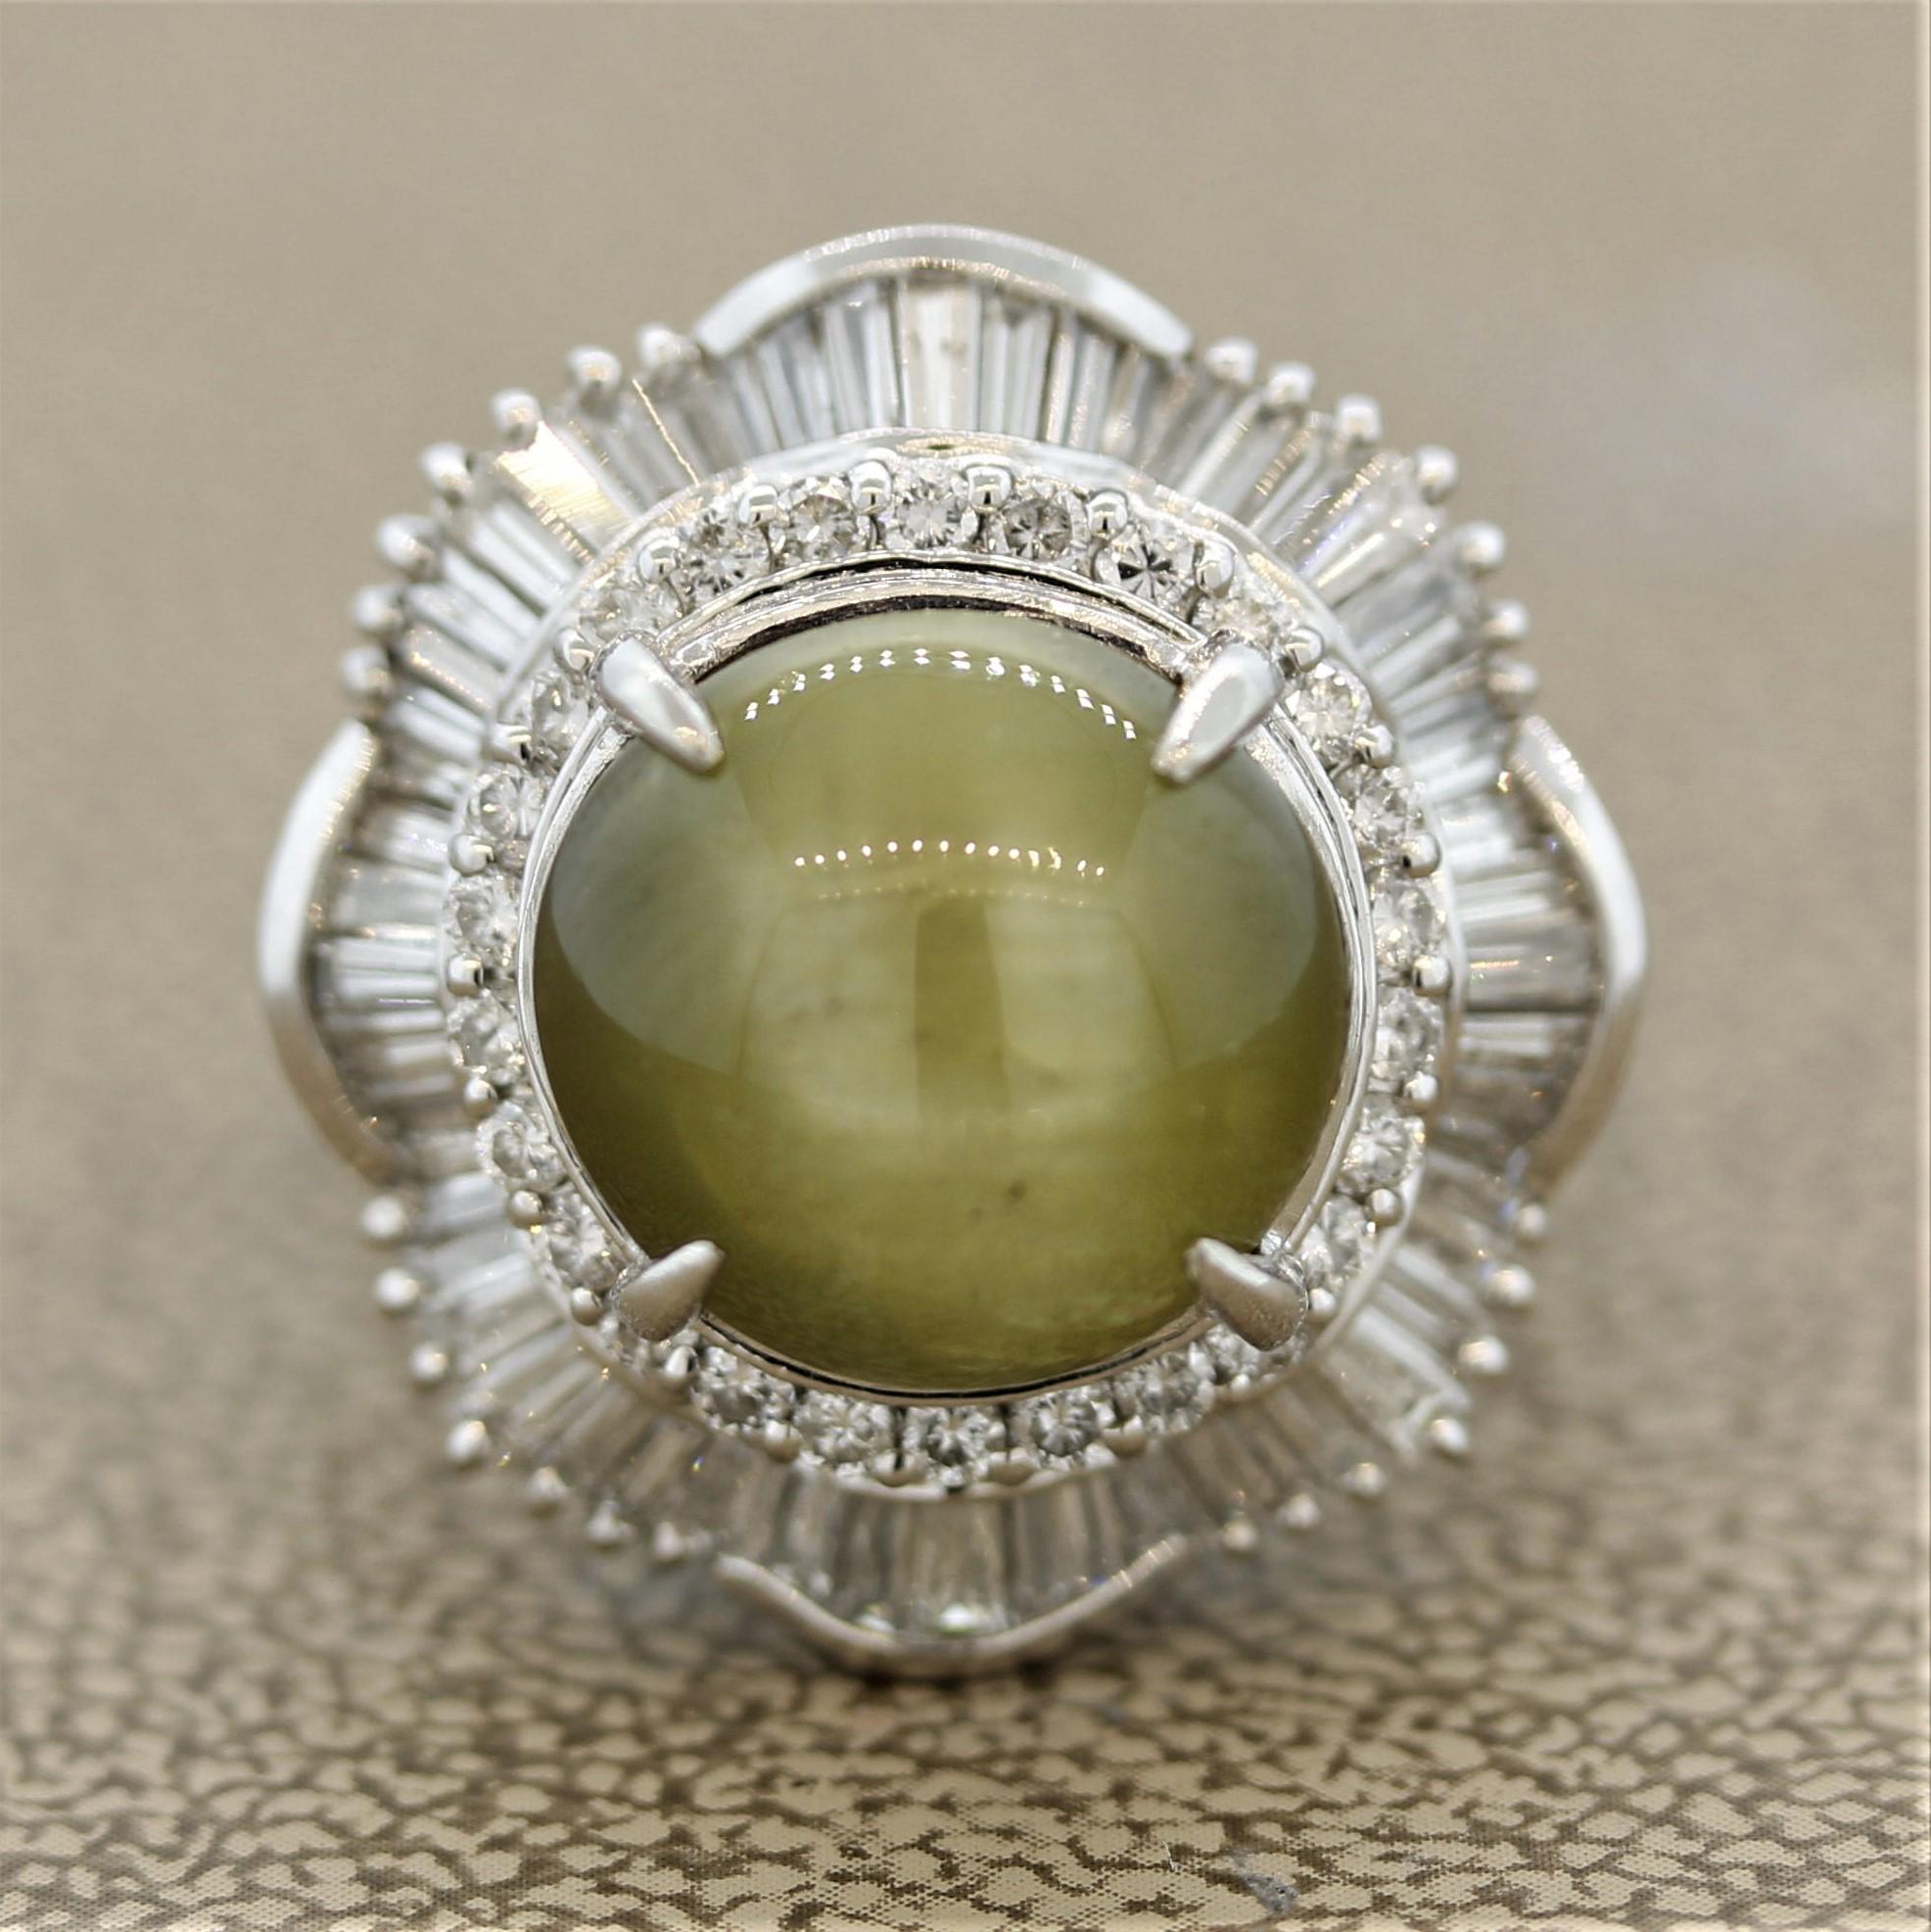 A stylish ring featuring a large 11.74 carats cat’s eye chrysoberyl showing an “eye” (chatoyancy) over its surface as light hits the stone. It is surrounded by 1.17 carats of round brilliant and baguette cut diamonds set in a unique pattern around